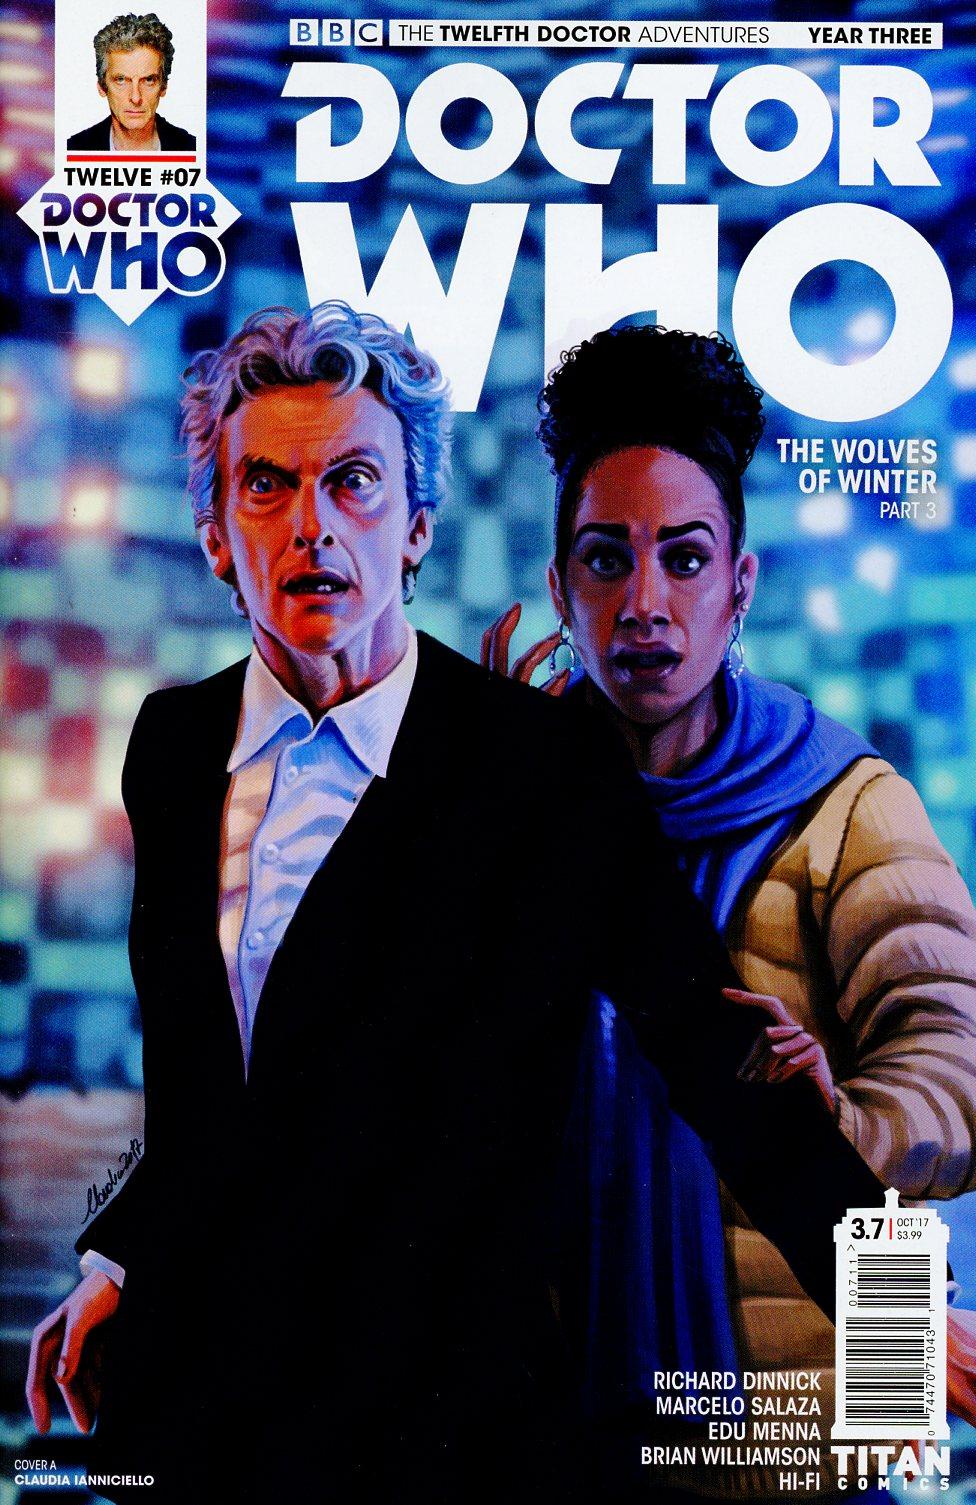 Doctor Who 12th Doctor Year Three Vol. 1 #7